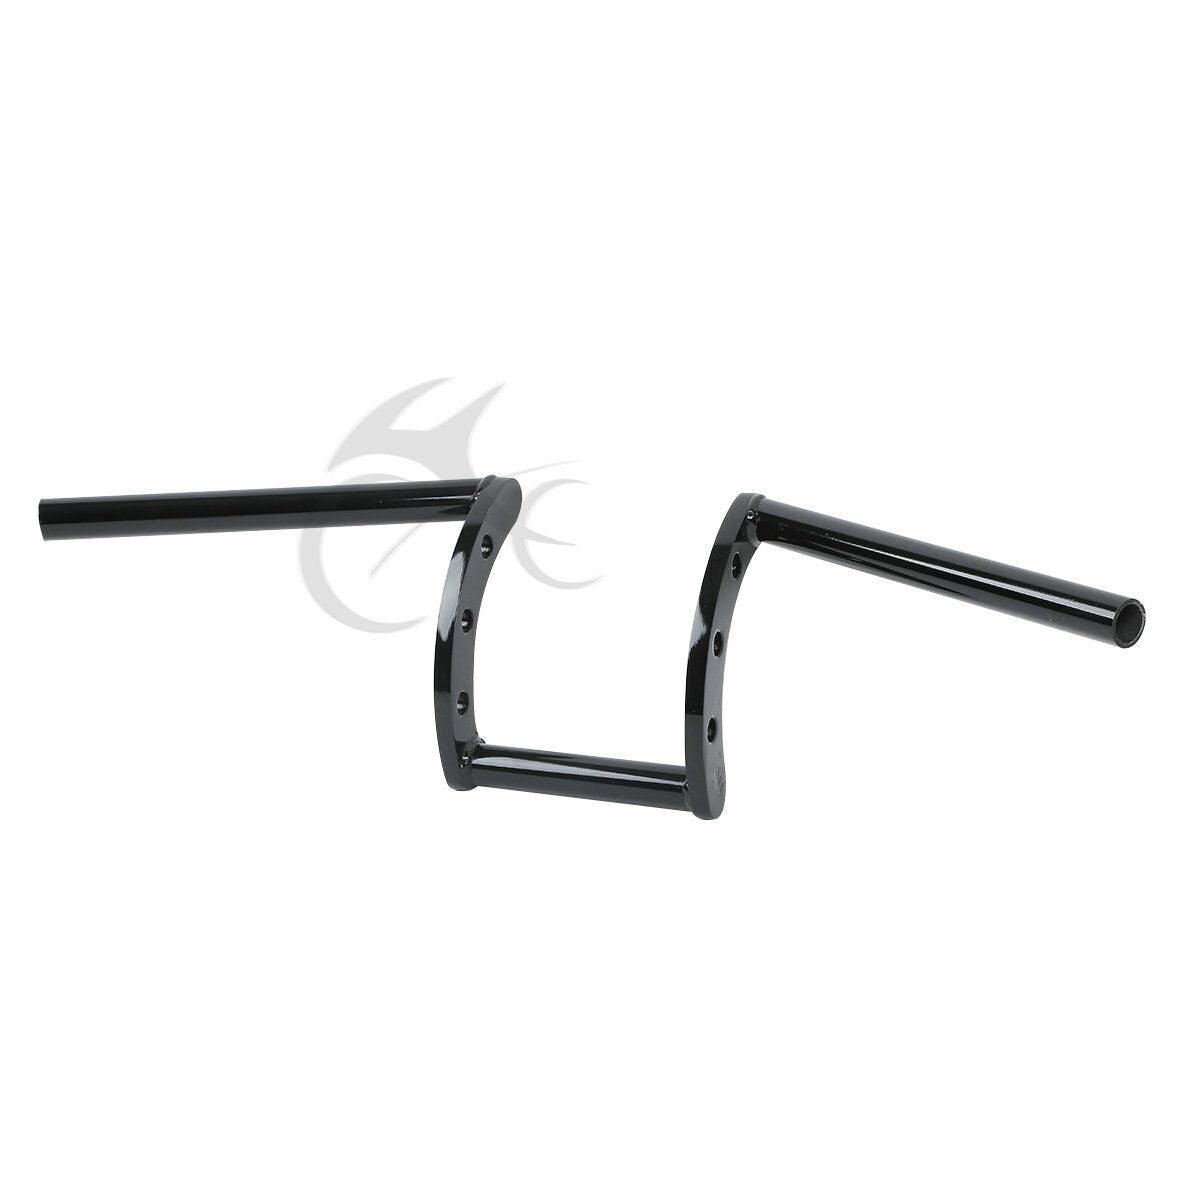 Chrome/Black Z-Bars 1" Handlebars Fit For Harley Sportster Softail Dyna Chopper - Moto Life Products